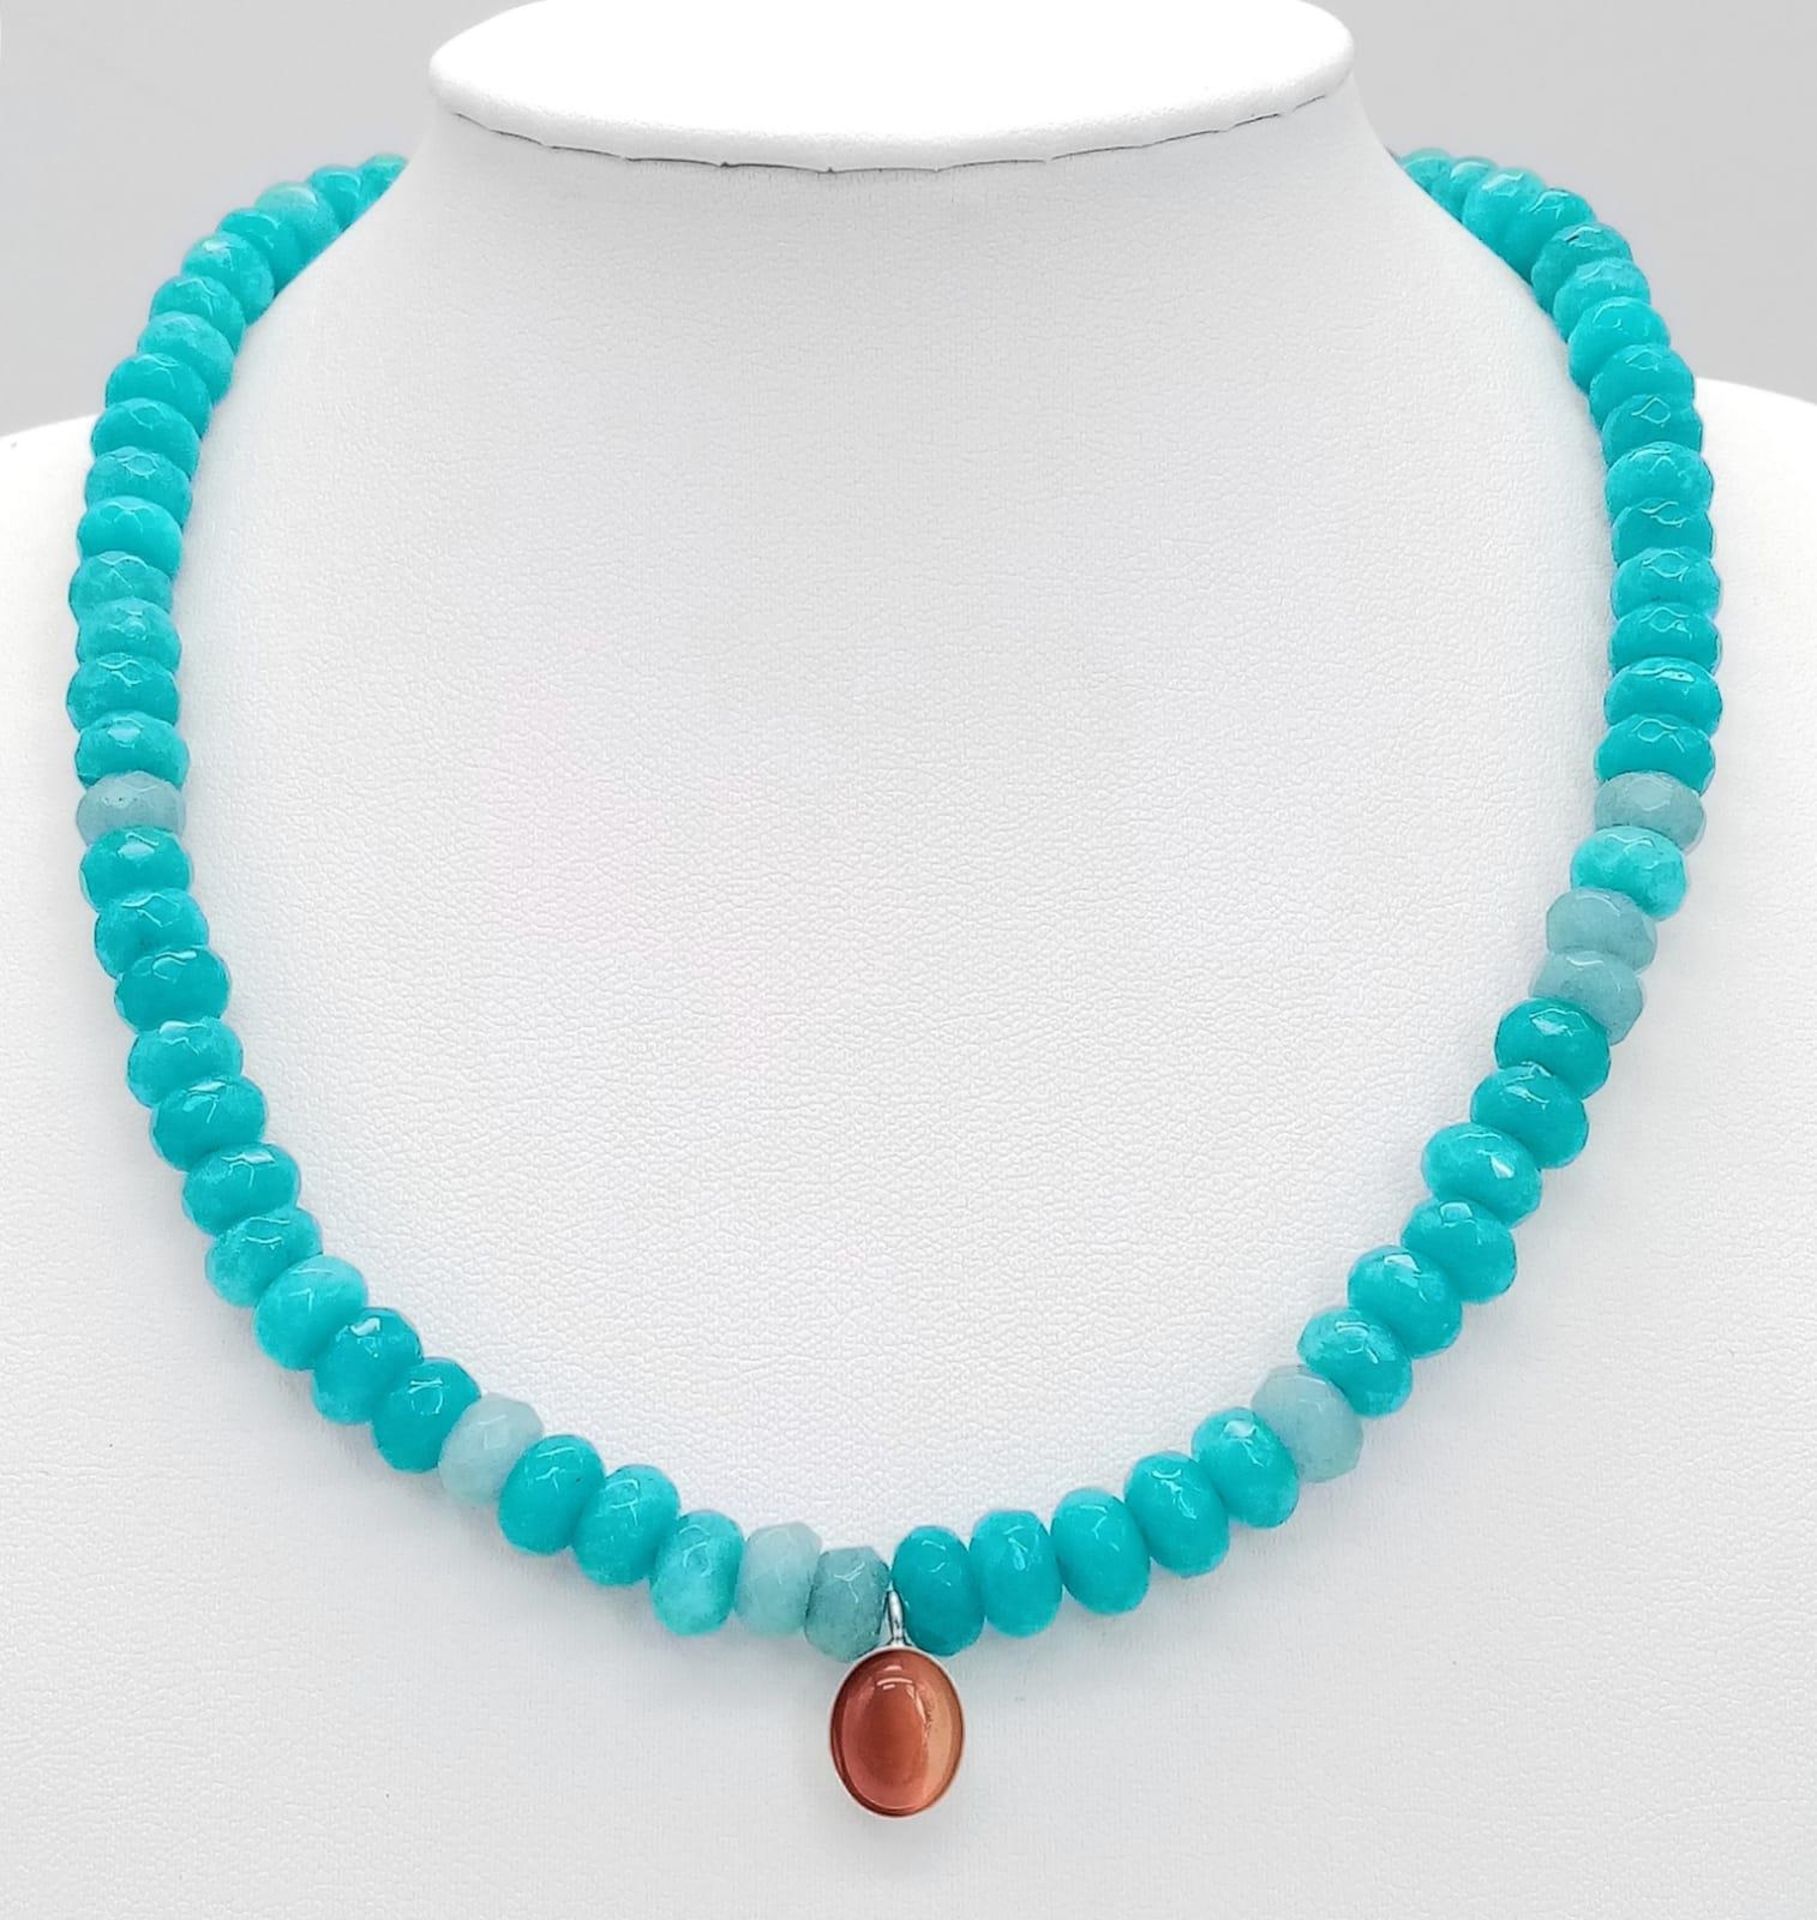 Bright Blue Aquamarine Stone Necklace with a Carnelian Stone Pendant. Length: 40cm Weight: 39.5g